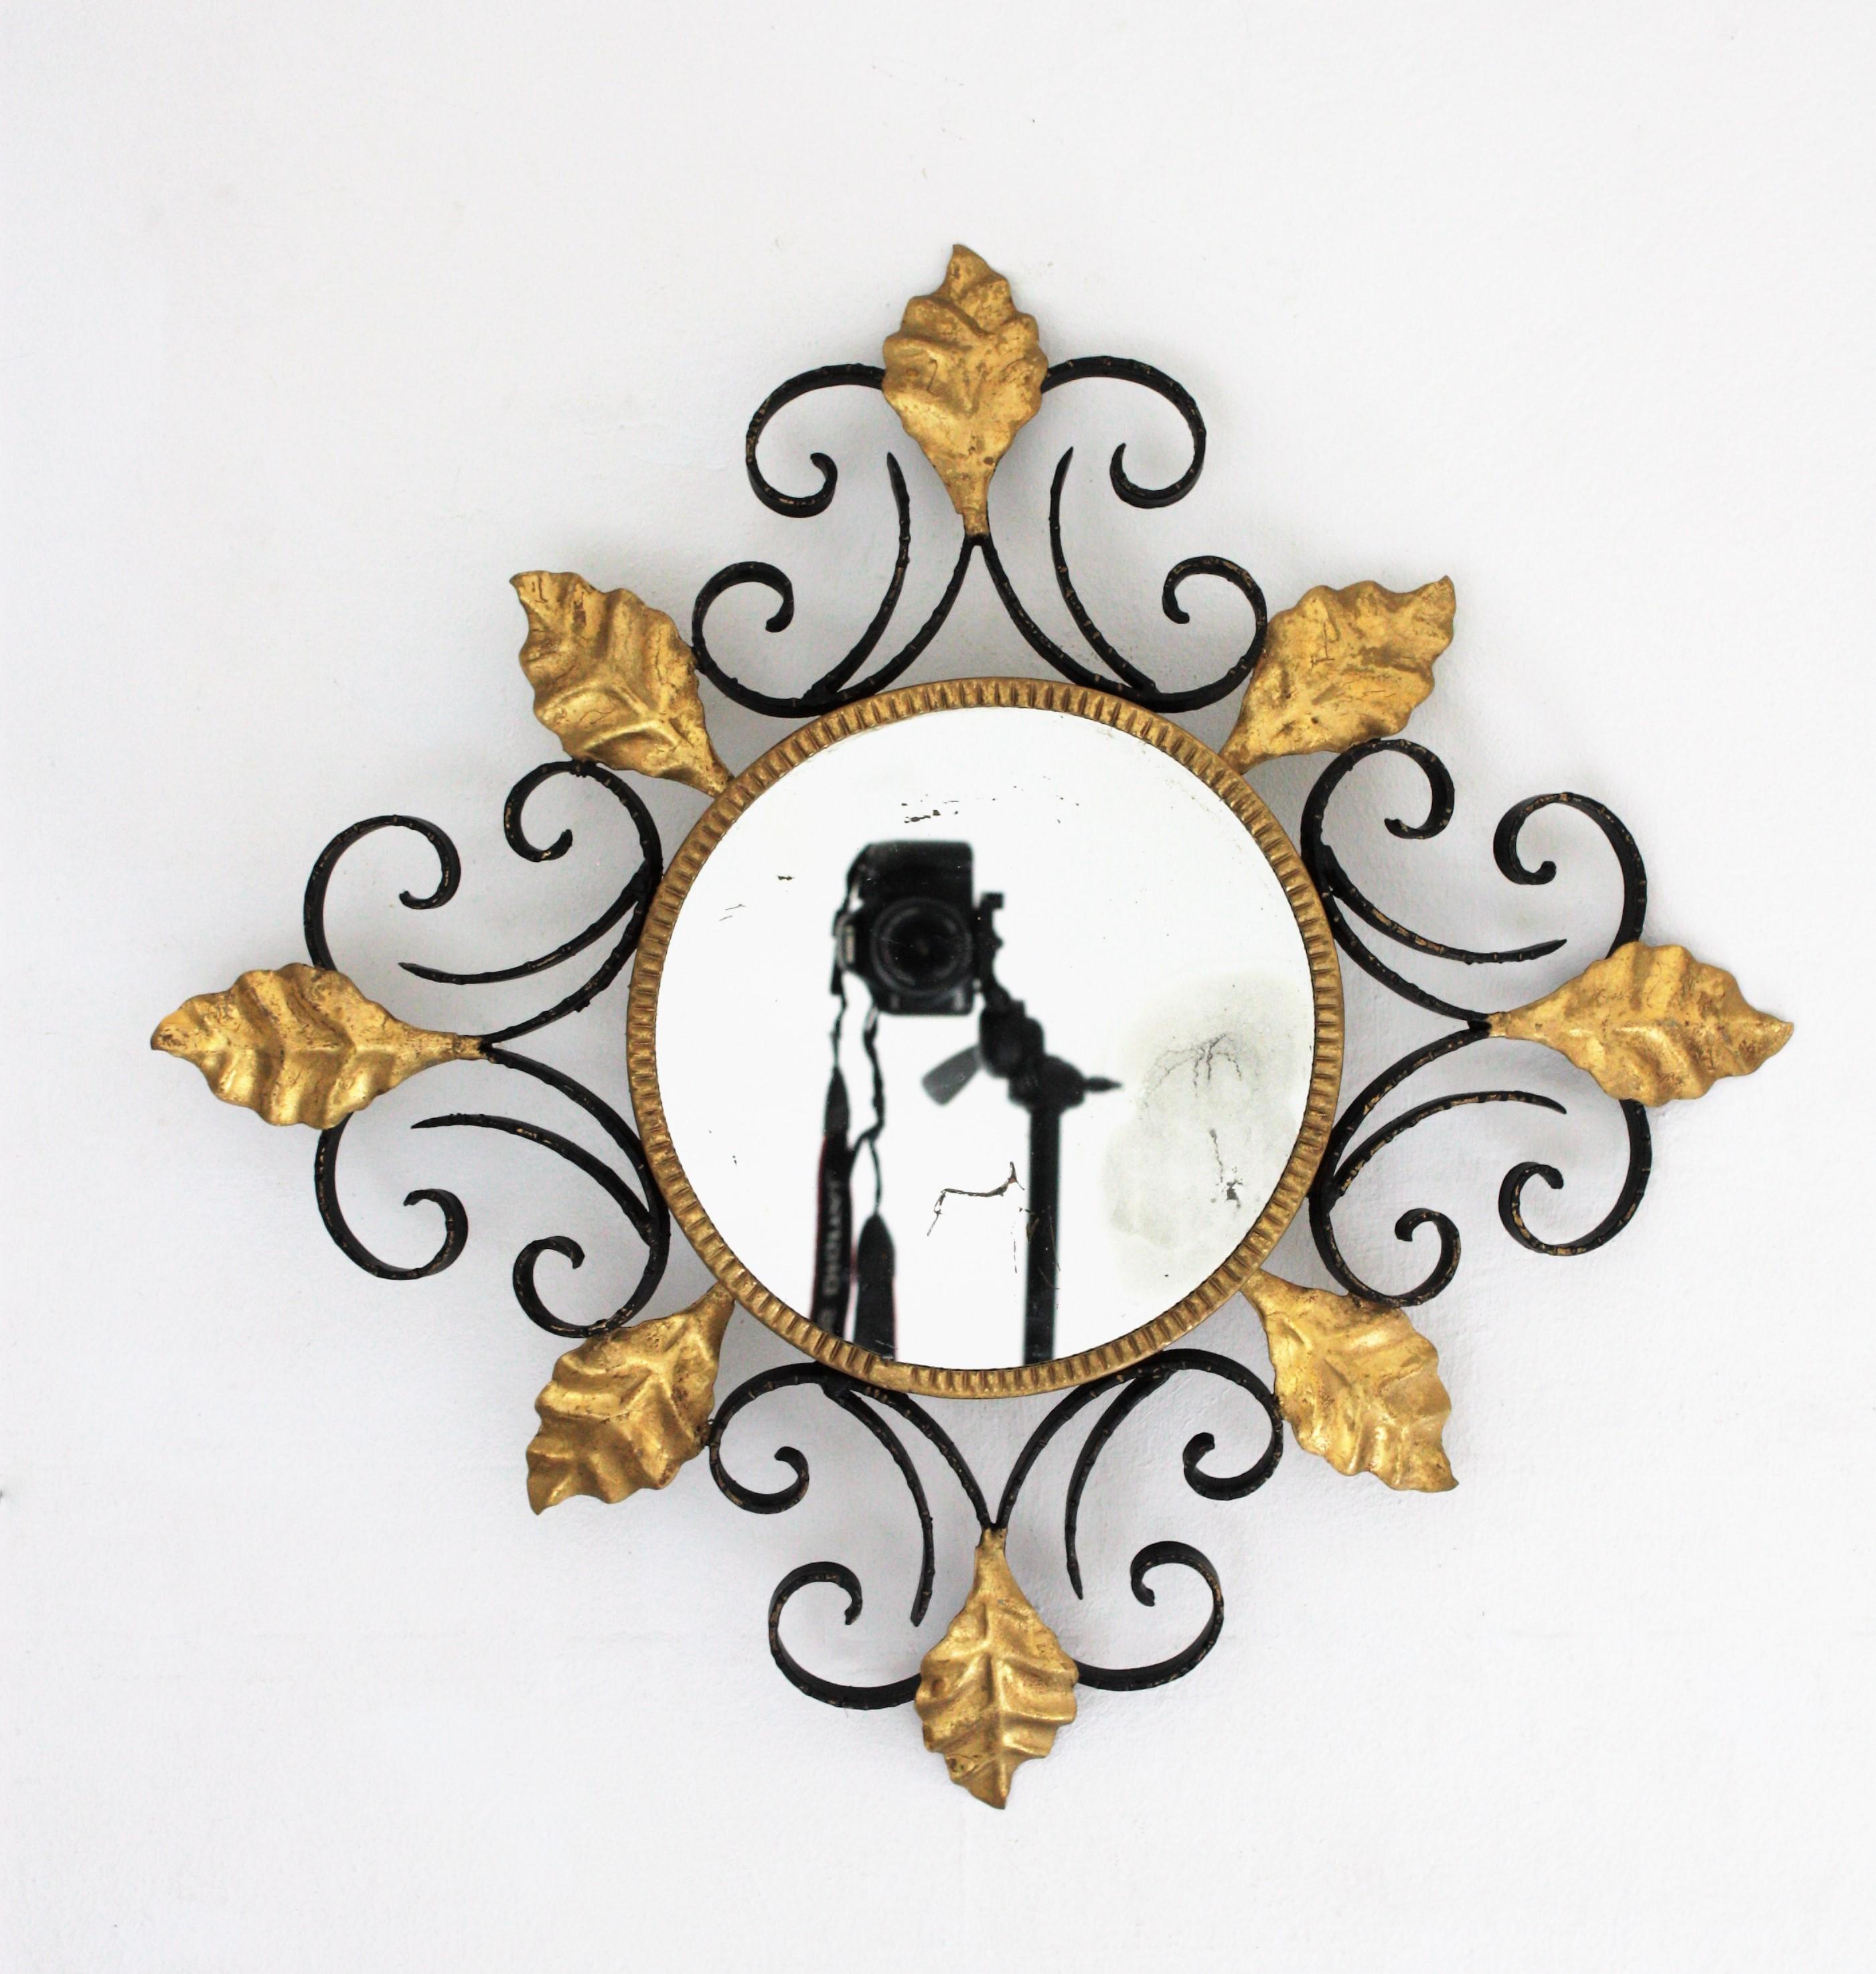 Amazing hand-hammered iron black and gilded scroll motif leafed light fixture / sunburst mirror. Spain, 1950s.
Scrollwork patinated in black color accented by gold leaf gilt leaves.
The contrasting effect between black and gilt iron highlights the